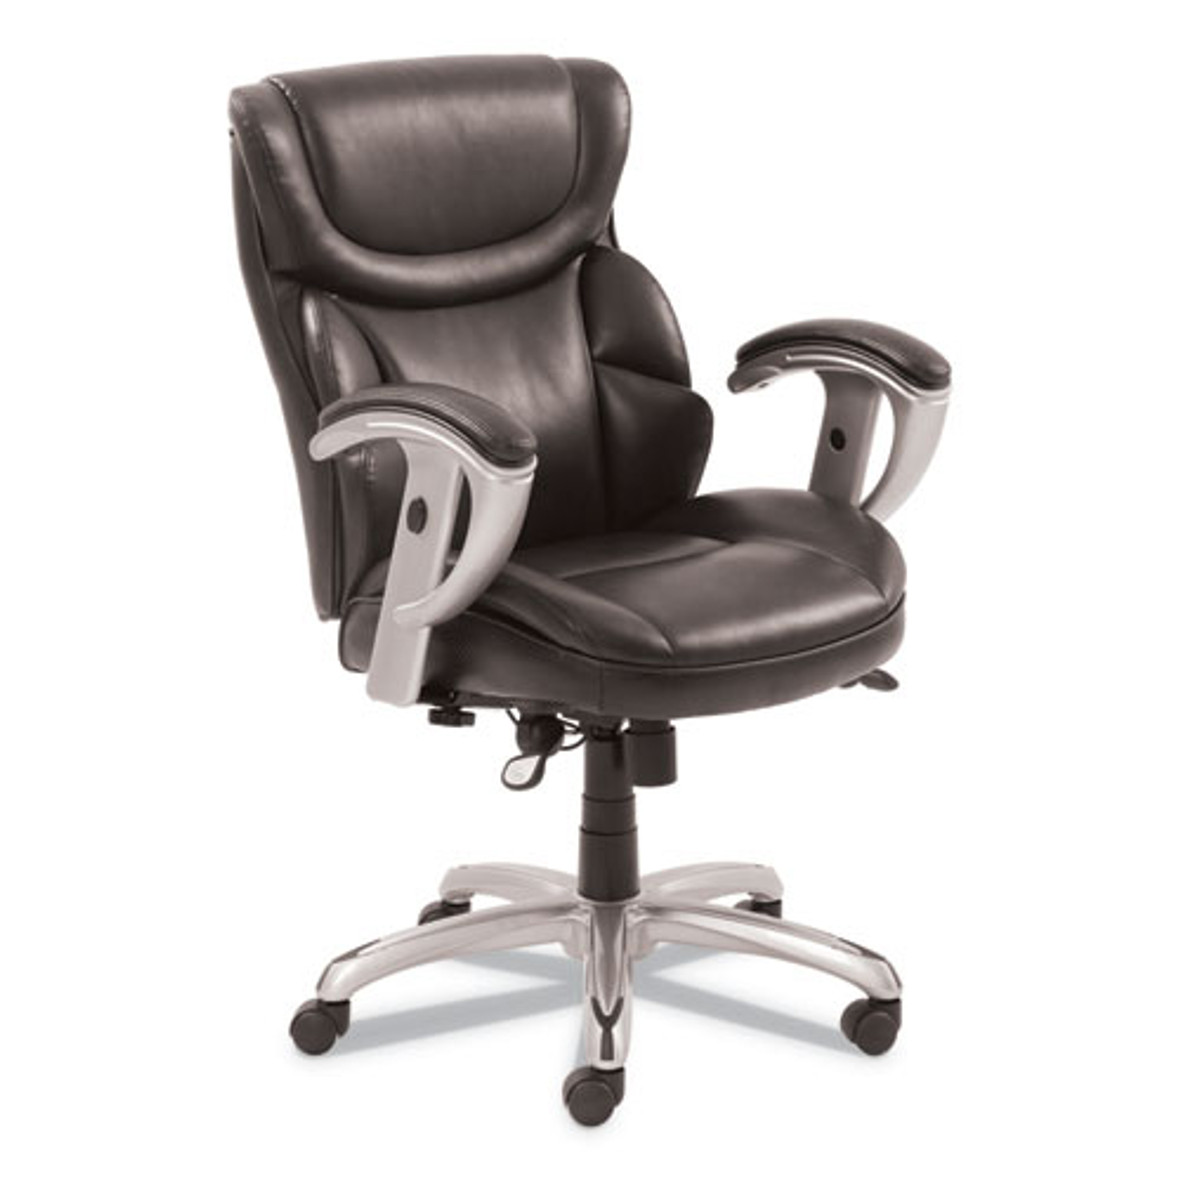 SertaPedic® Emerson Task Chair, Supports Up to 300 lb, 18.75" to 21.75" Seat Height, Brown Seat/Back, Silver Base, Pack of 1